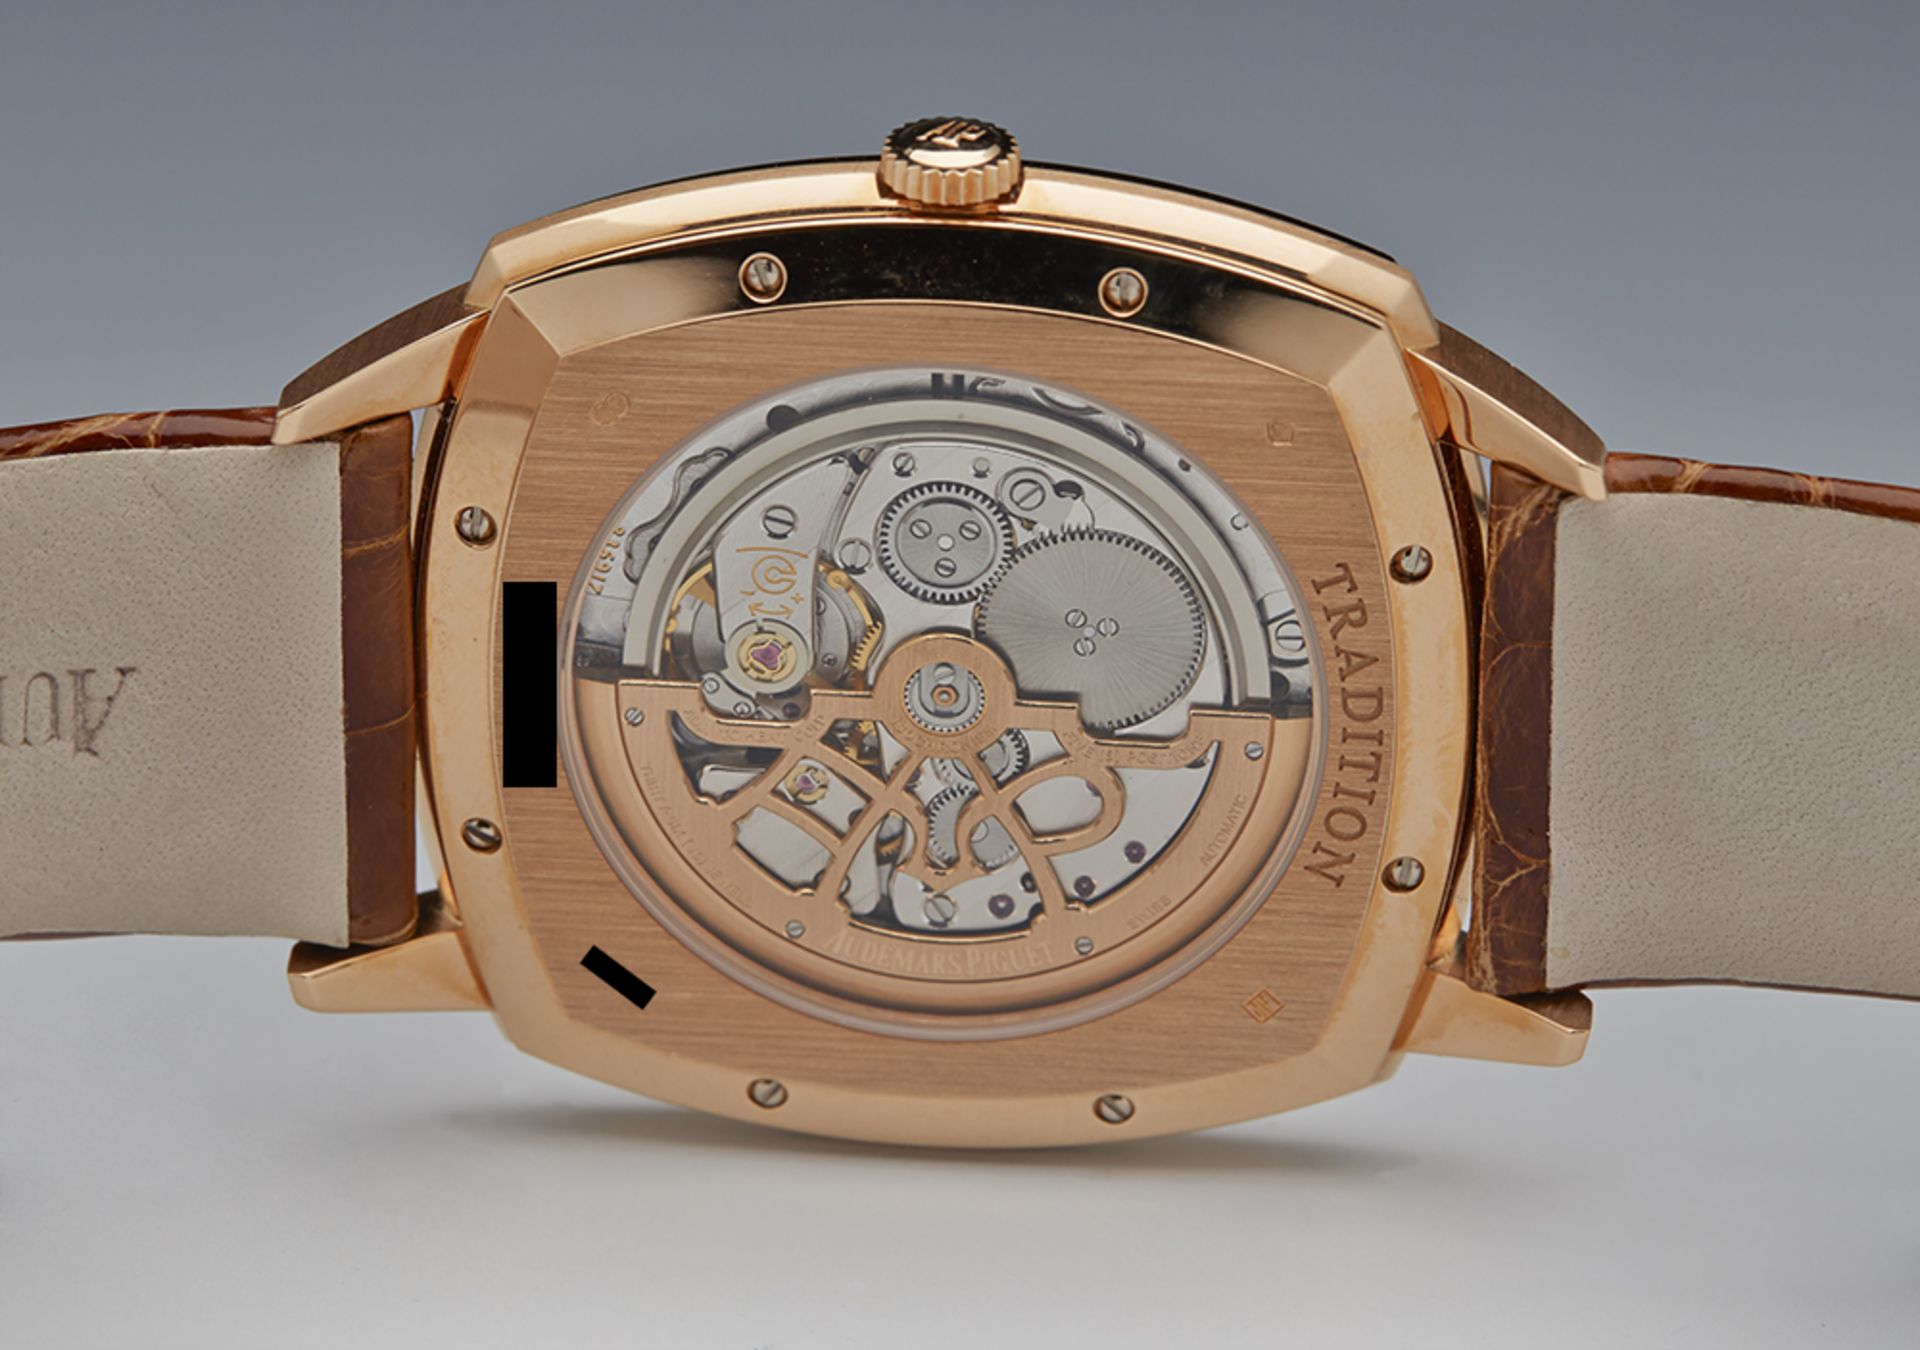 Audemars Piguet, Tradition Extra Thin 18k Rose Gold Diamonds MOP 15337OR.ZZ.A810CR.01 - Image 9 of 11